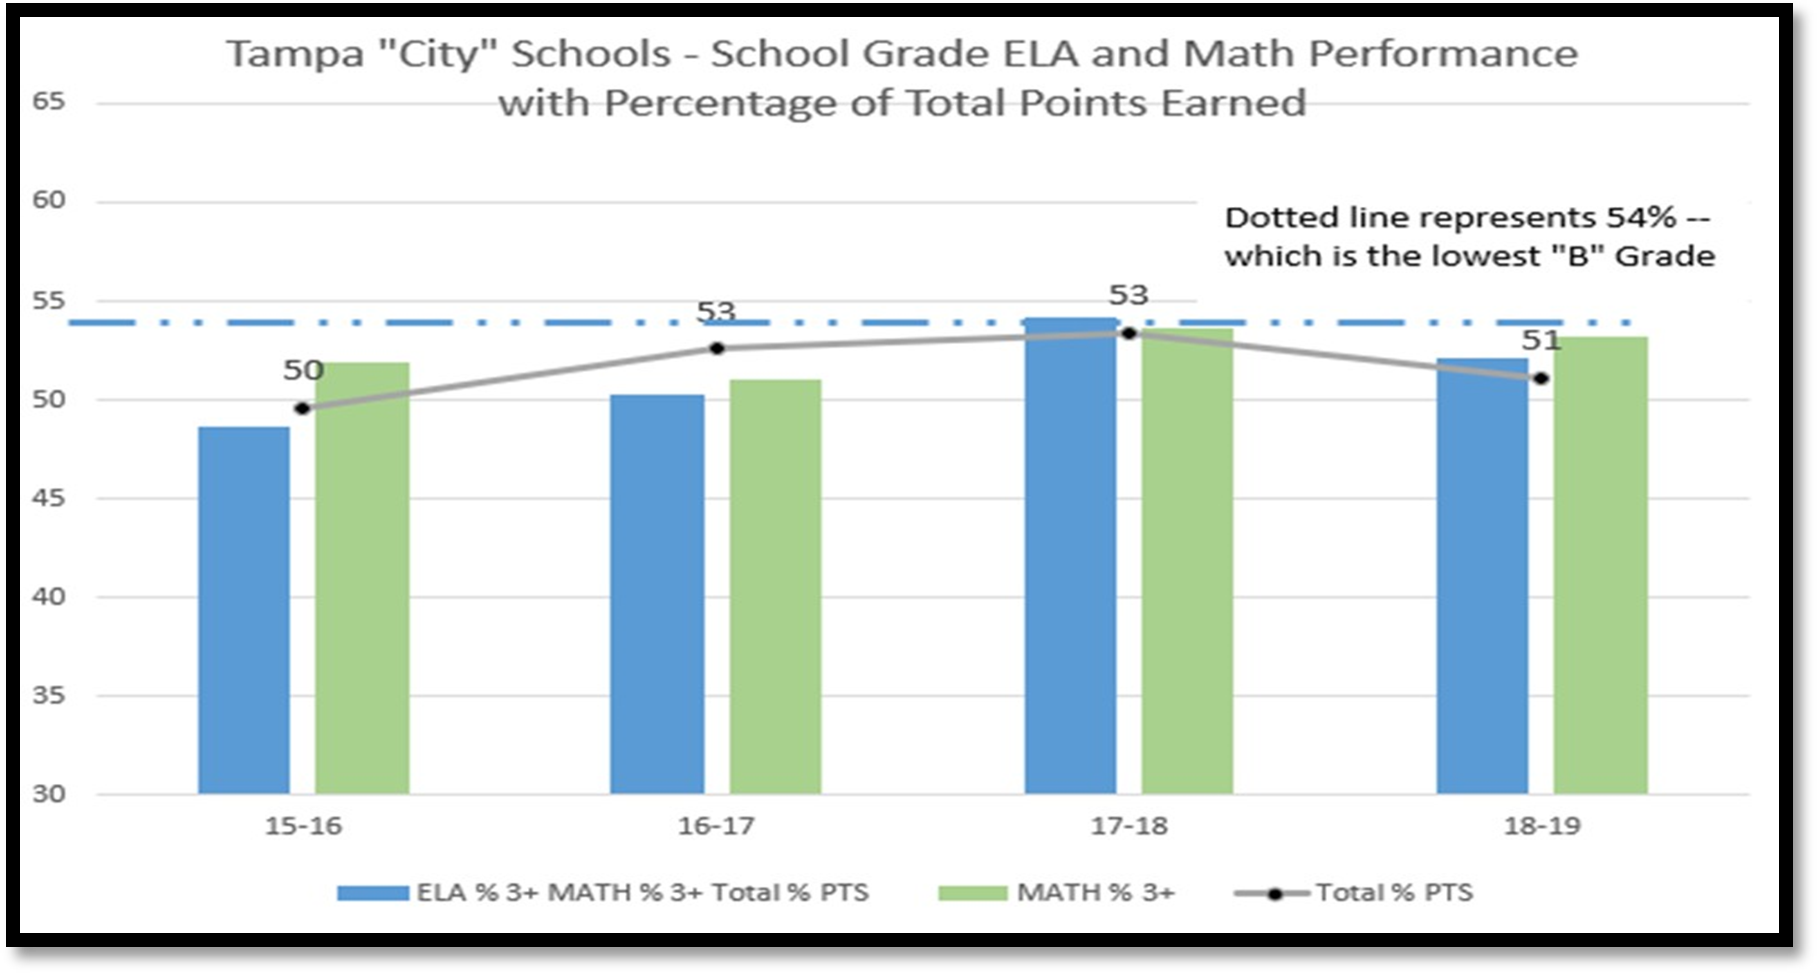 Tampa City Schools - School Grade ELA and Math Performance with Percentage of Total Points Earned